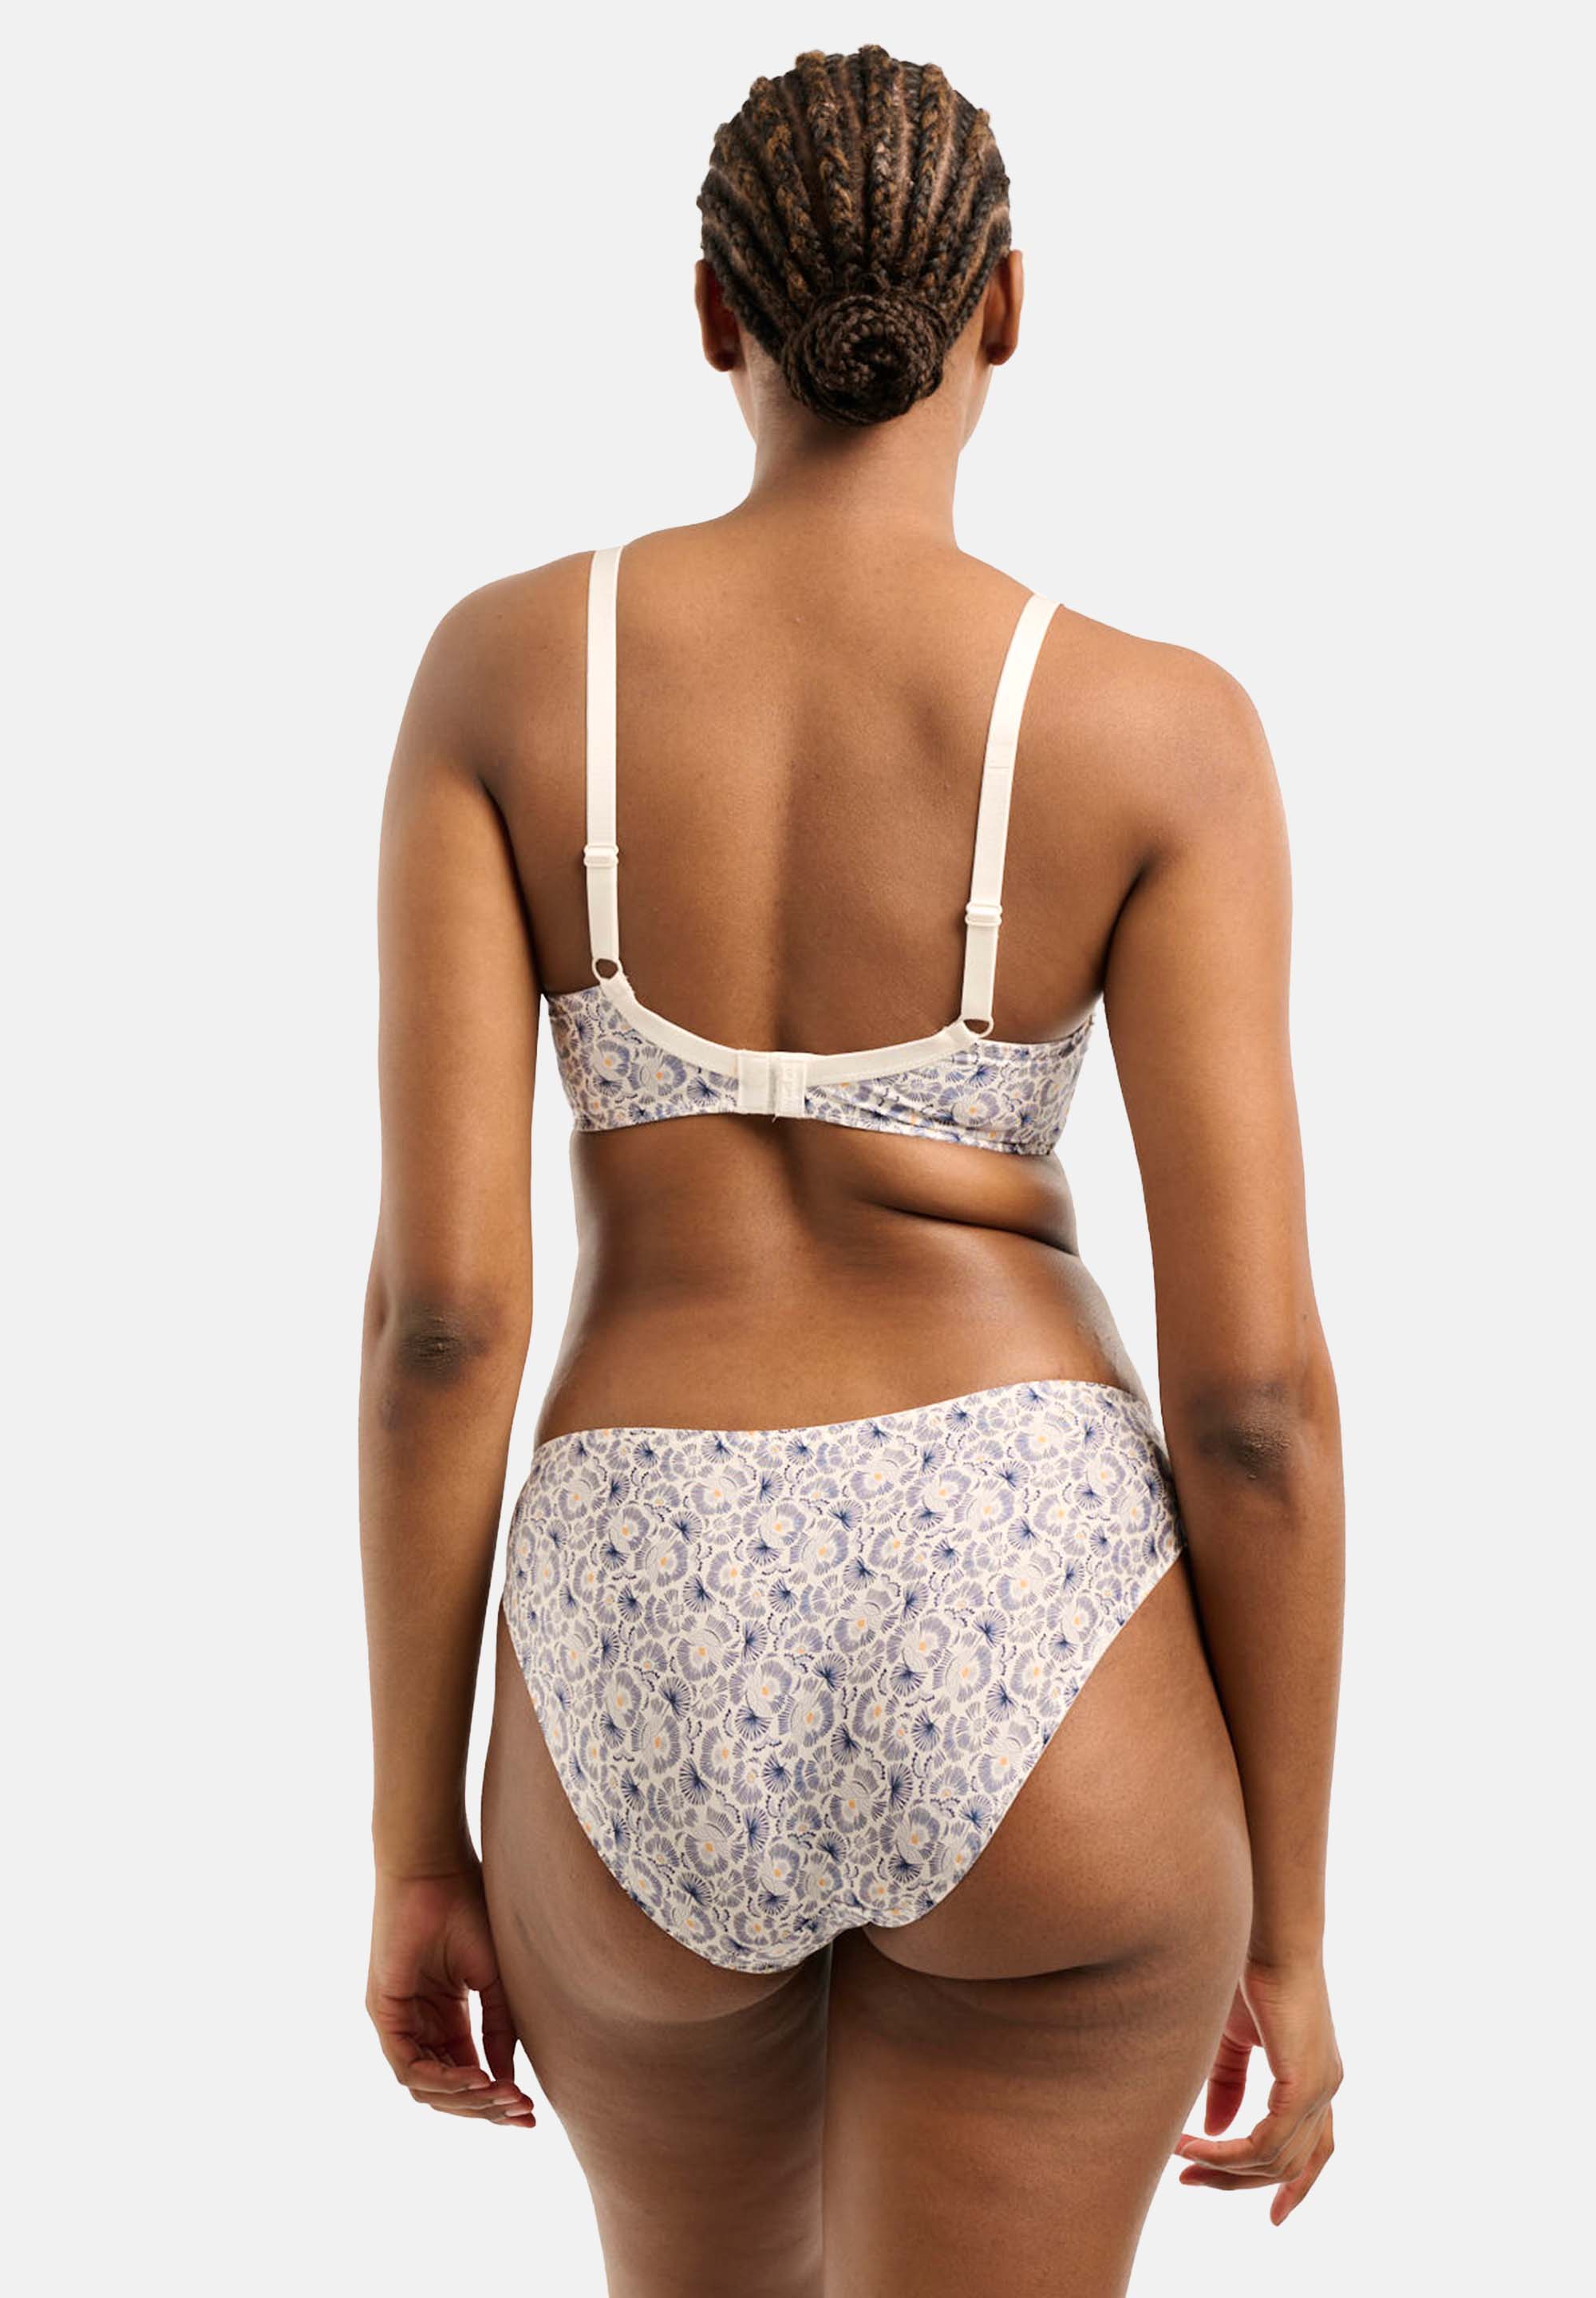 Complice Full Cup Bra Floral Print Ivory / Blue